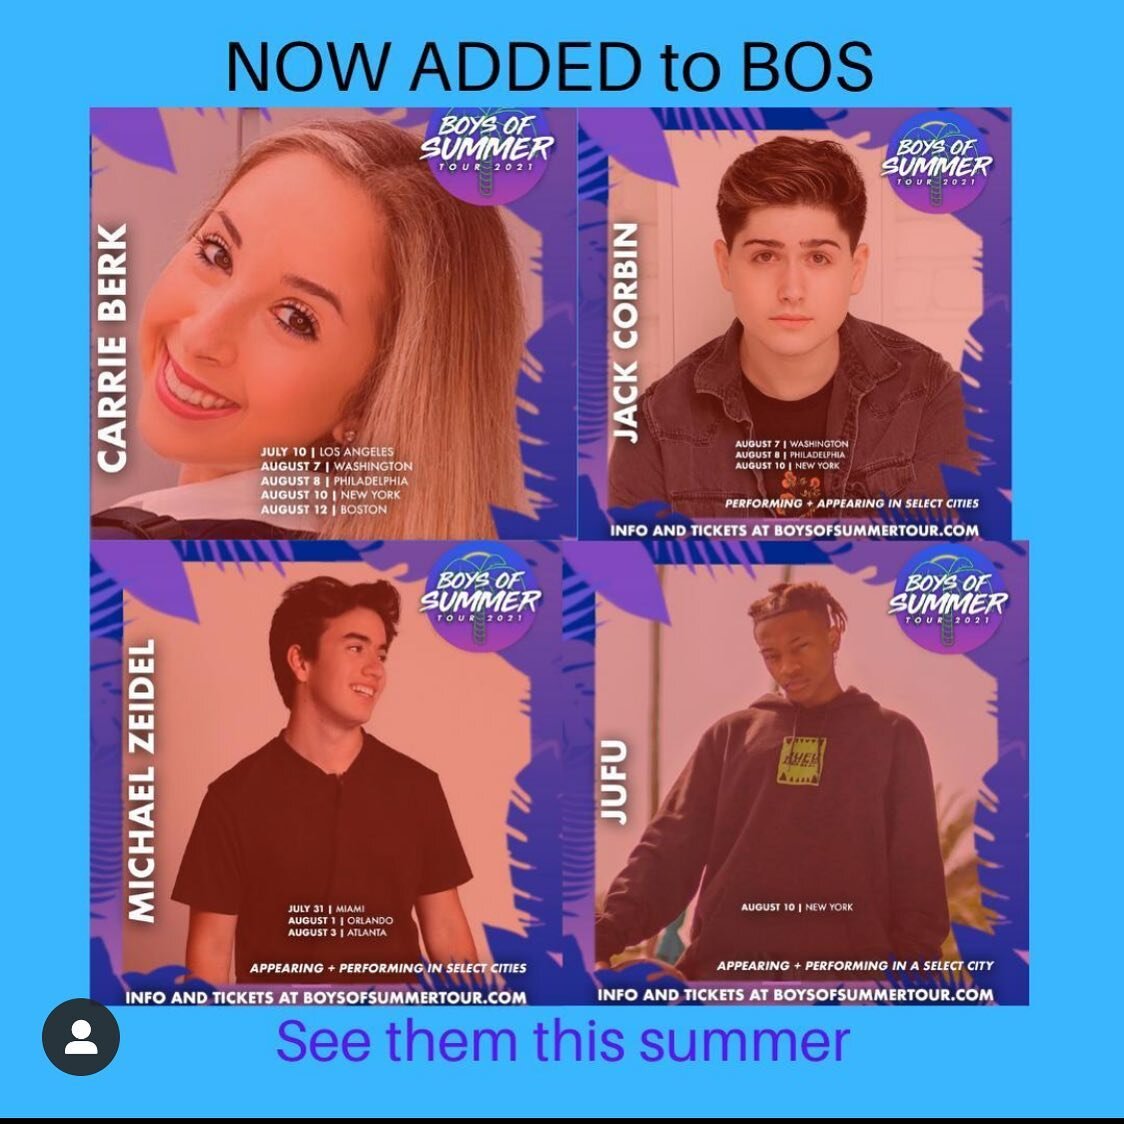 @jackdcorbin is going on tour this summer with @boysofsummertour !!!! Performing in DC, Philadelphia and NY!!! I&rsquo;m so excited for him 🔥🔥🔥
.
.
.
#jackdcorbin #boysofsummertour2021 #boysofsummertour #proudmom #music #musician #summertour #summ